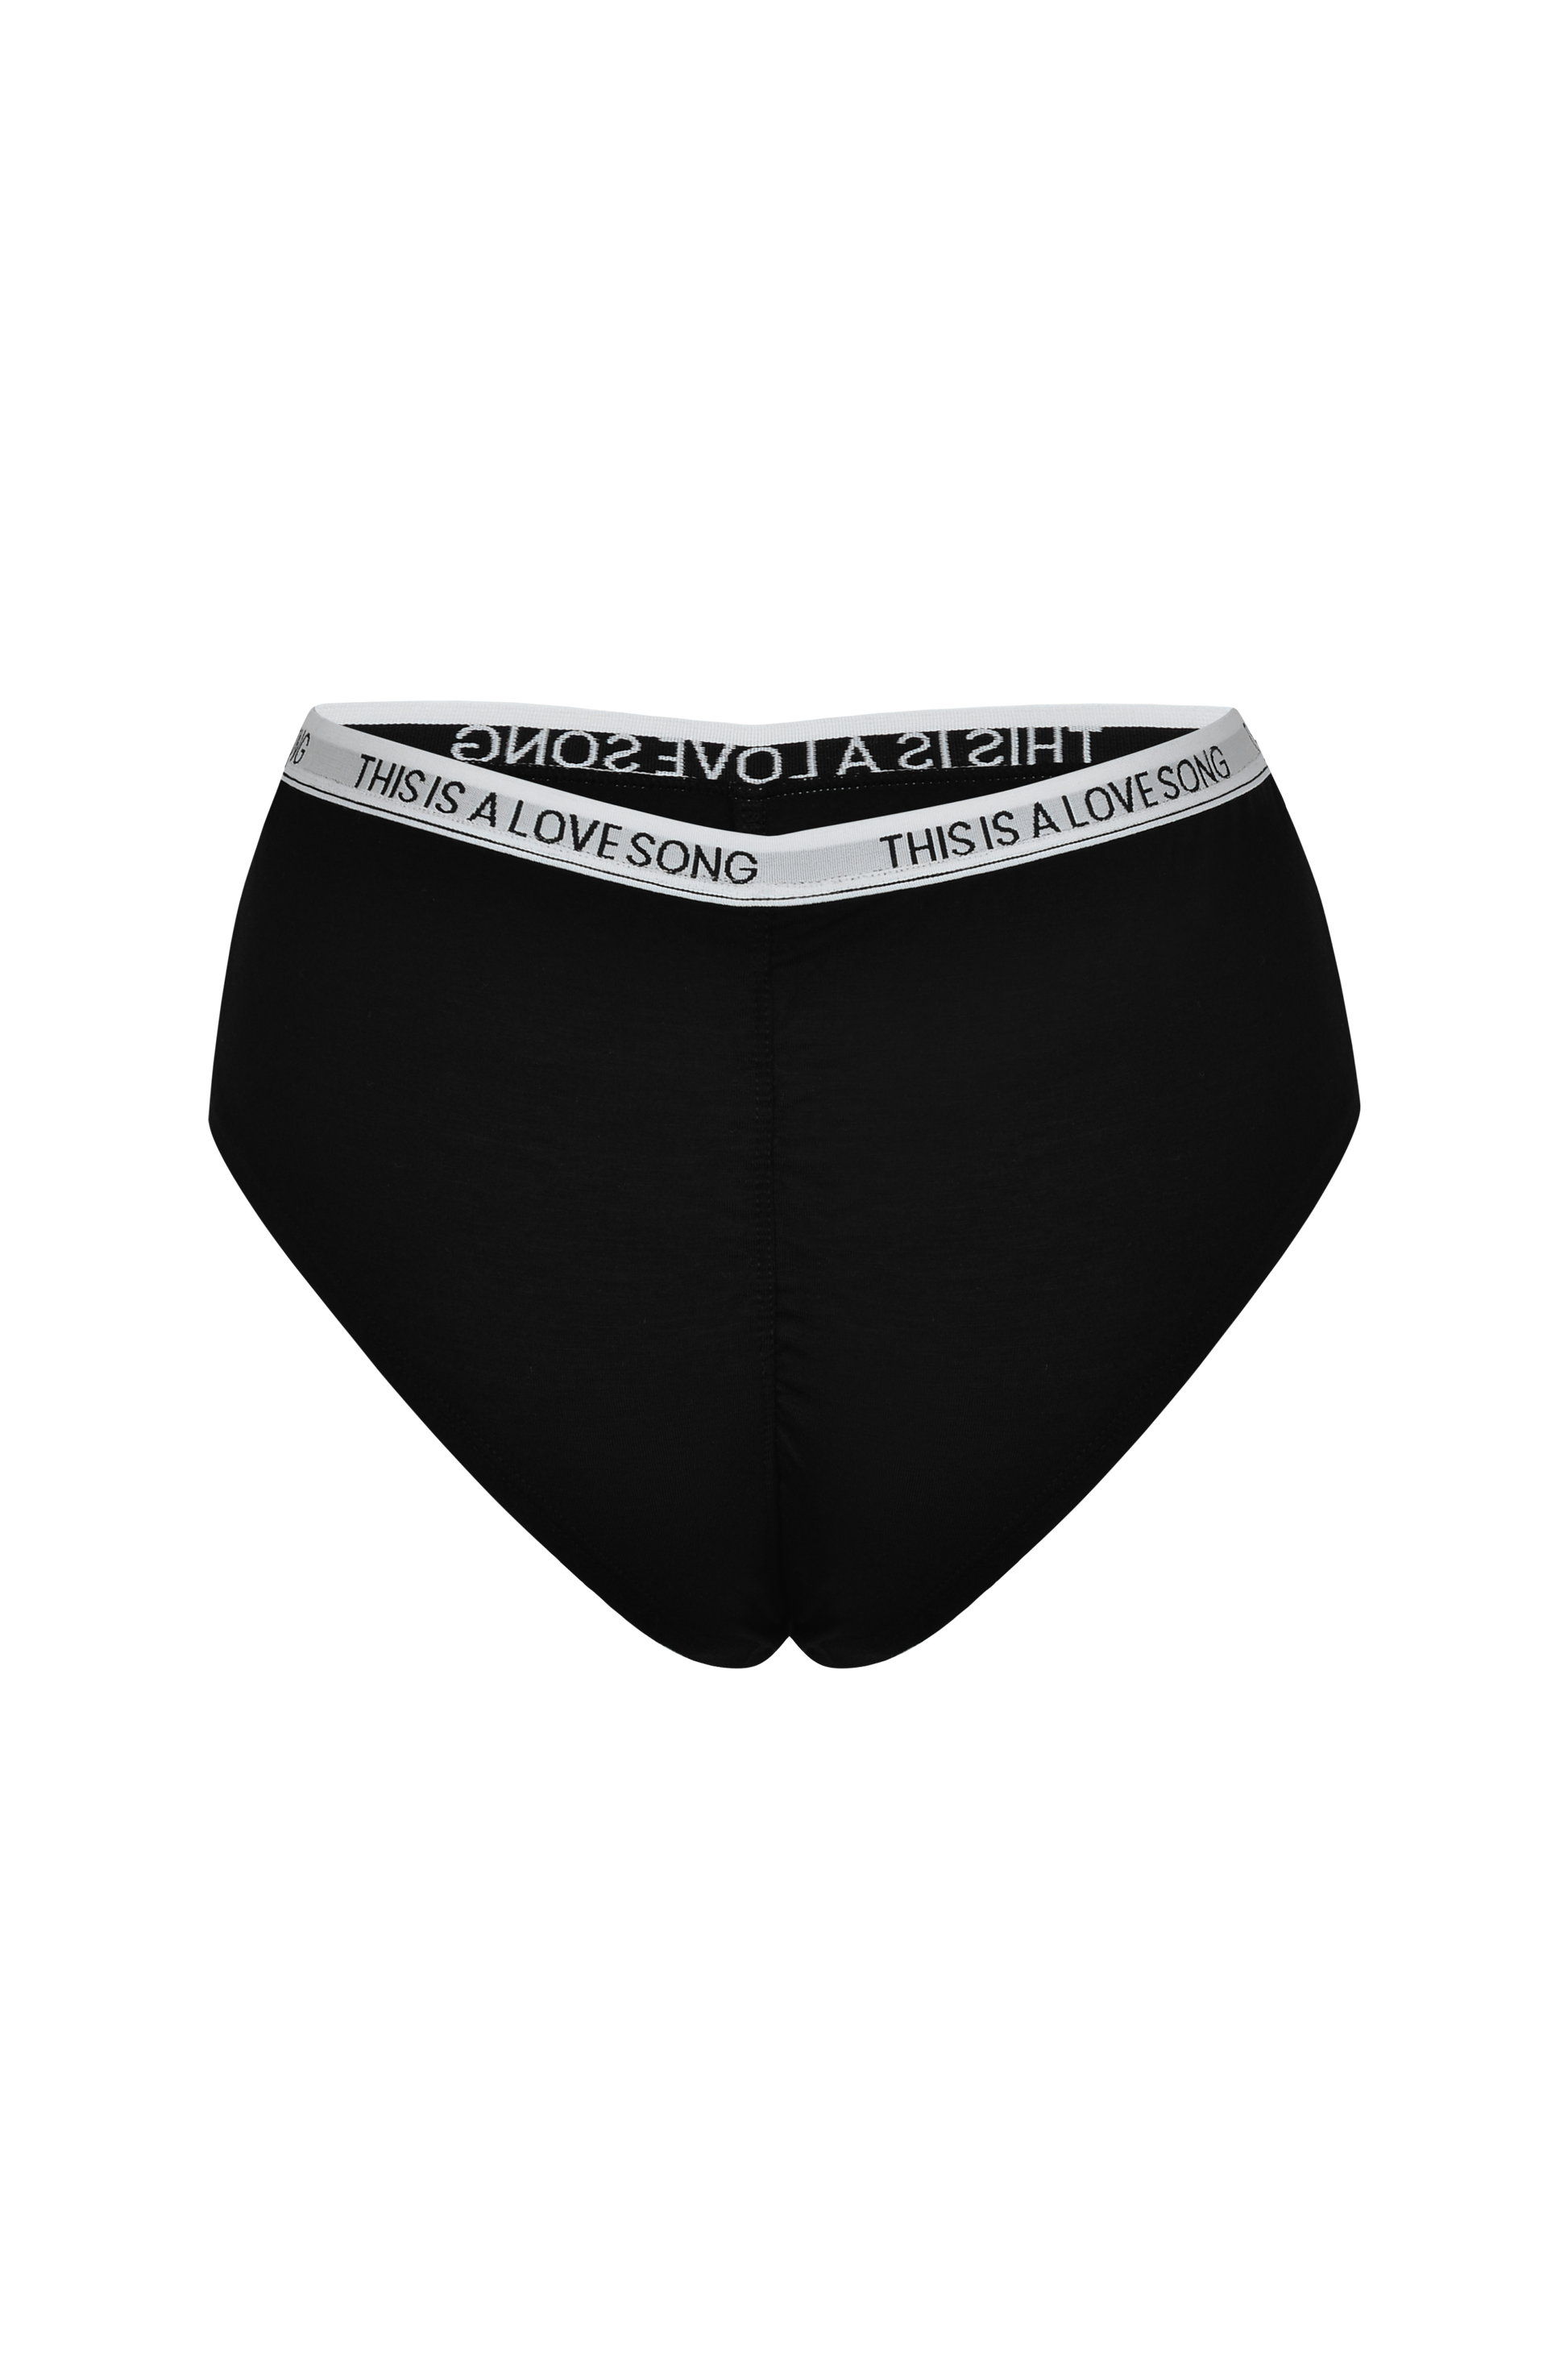 Boy Briefs Black - BOTTOMS THIS IS A LOVE SONG